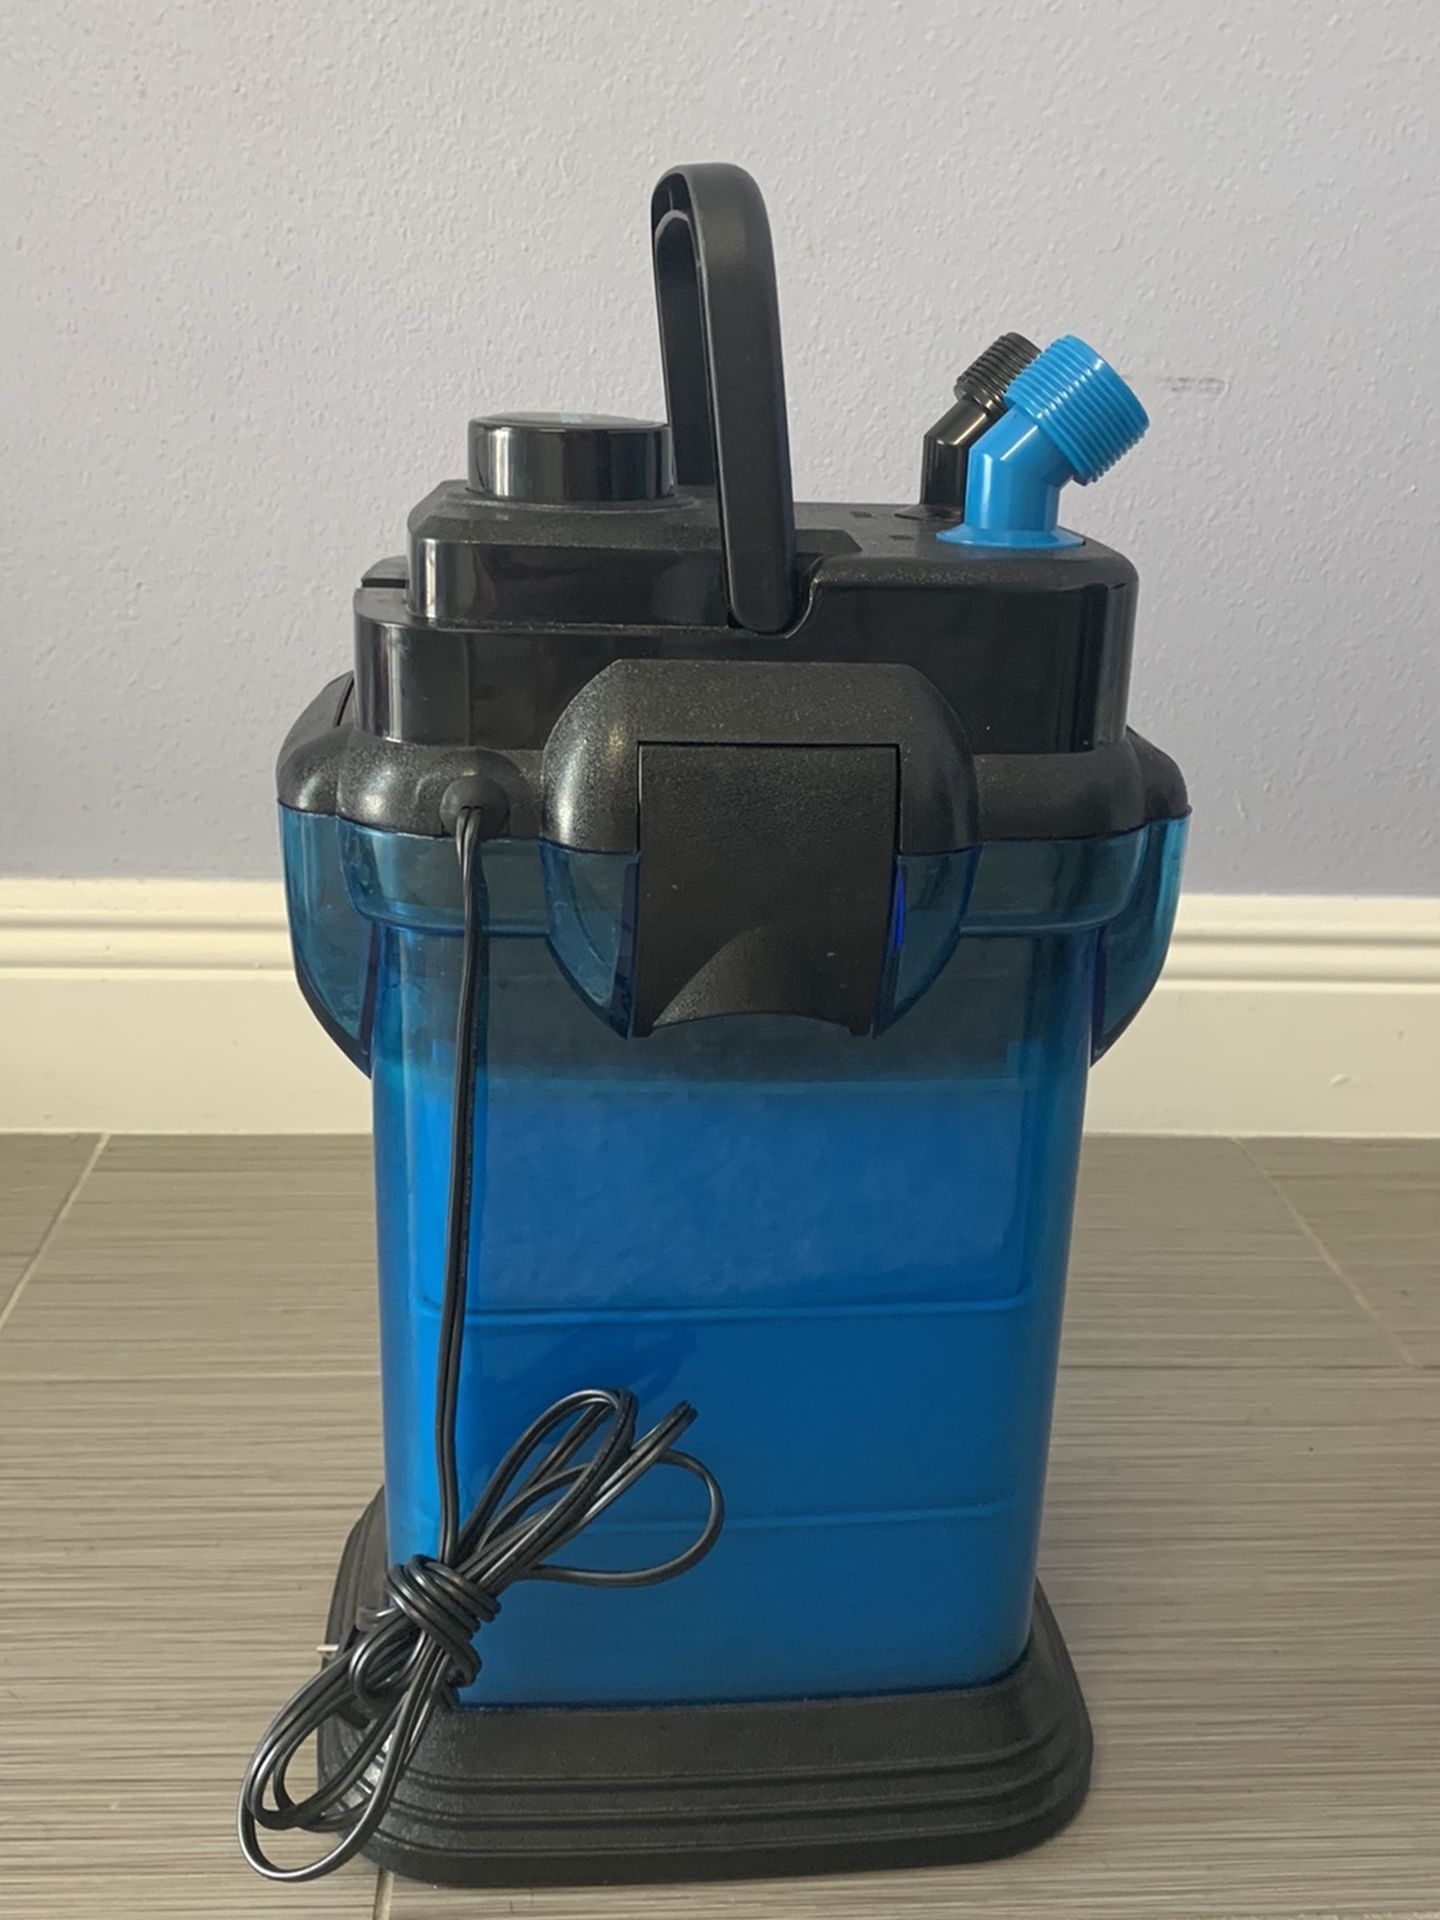 Cascade 1000 Canister Fish Tank Filter